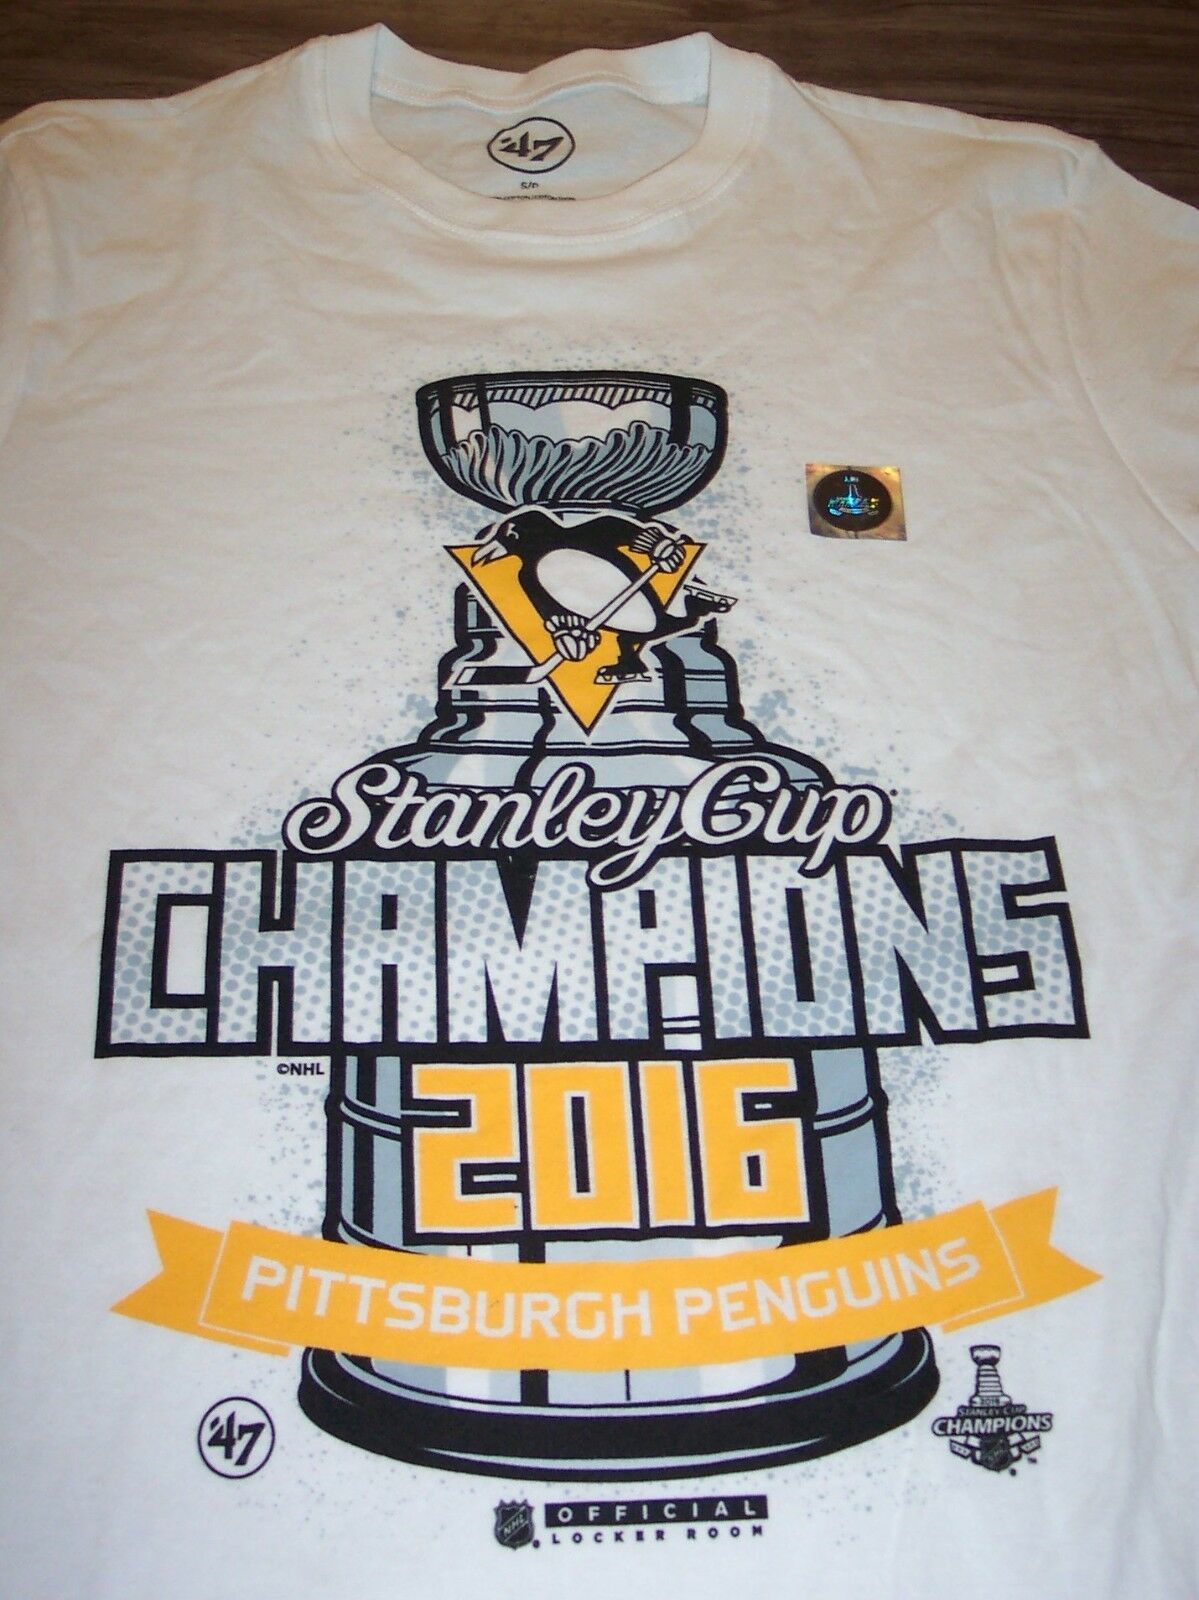 PITTSBURGH PENGUINS 2016 STANLEY CUP CHAMPIONS NHL HOCKEY T-shirt SMALL NEW - $19.80